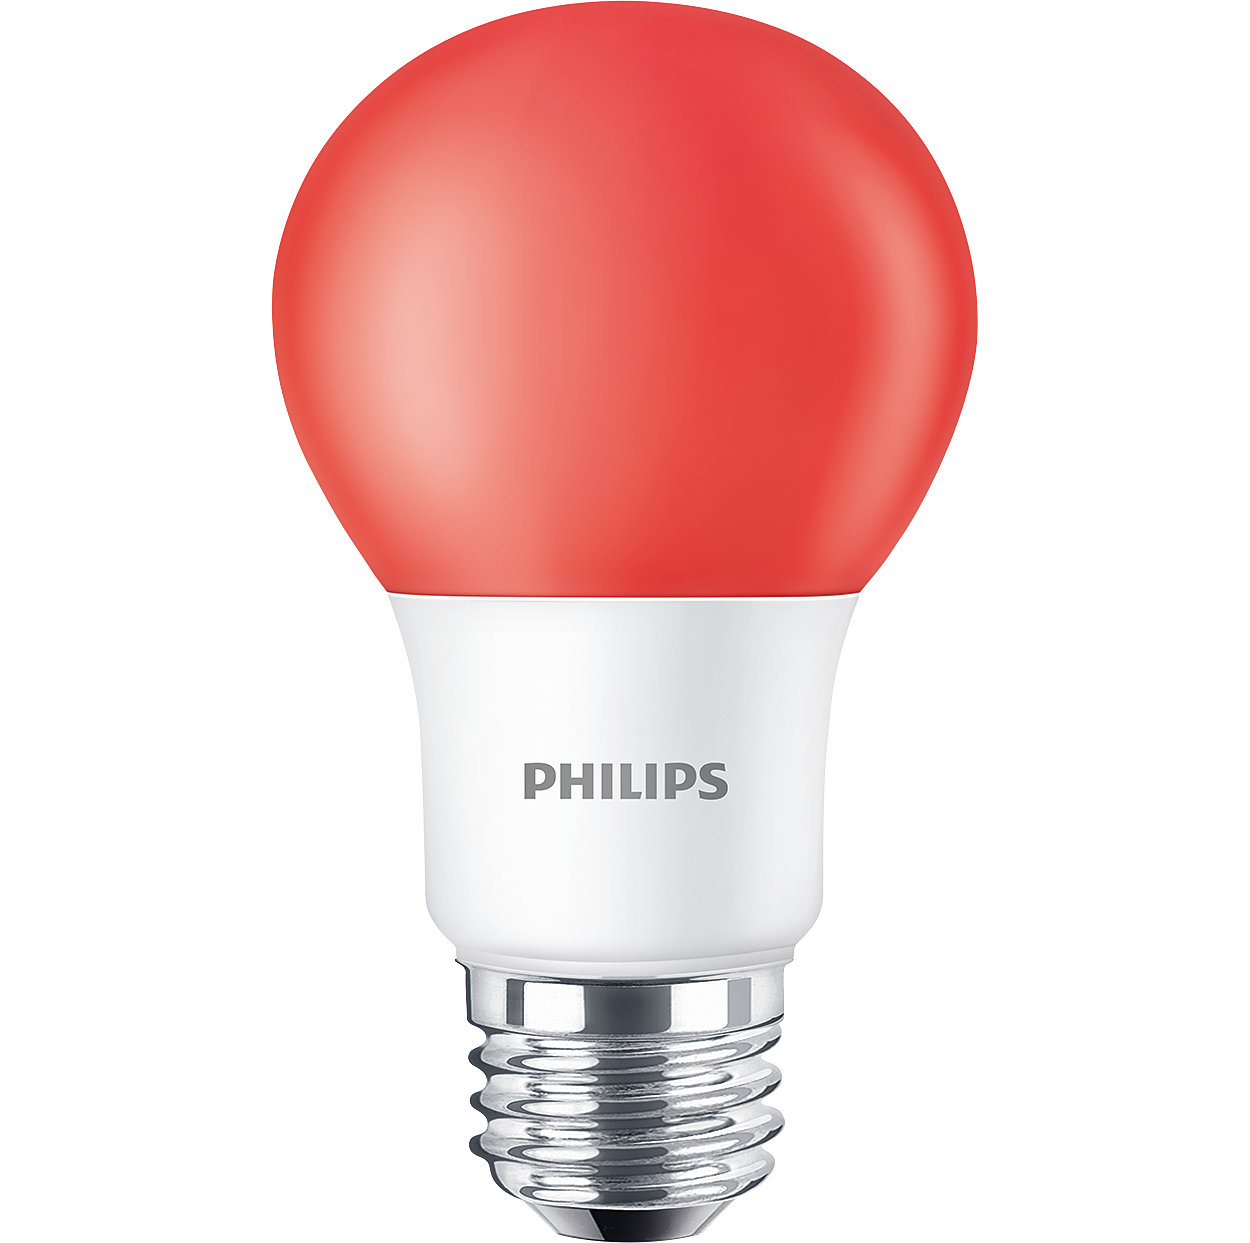 The affordable LED bulb solution